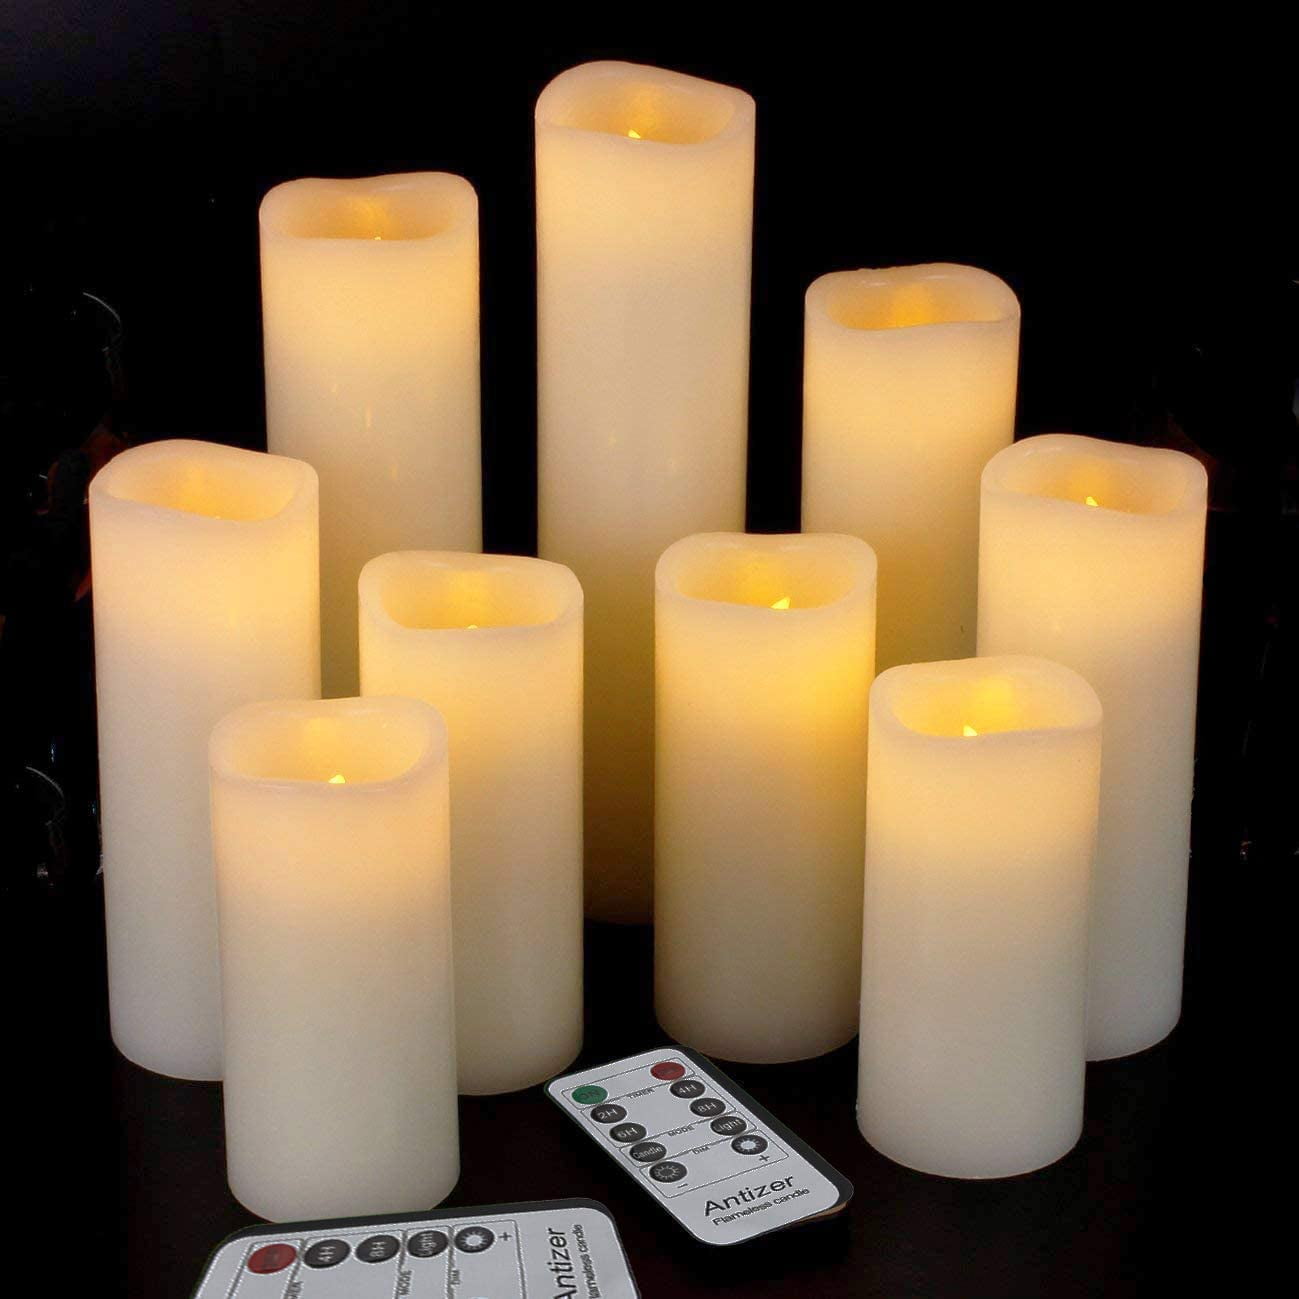 Vinkor Flameless Candles Outdoor Flickering Flame Battery Operated Wickless 5 Pc 